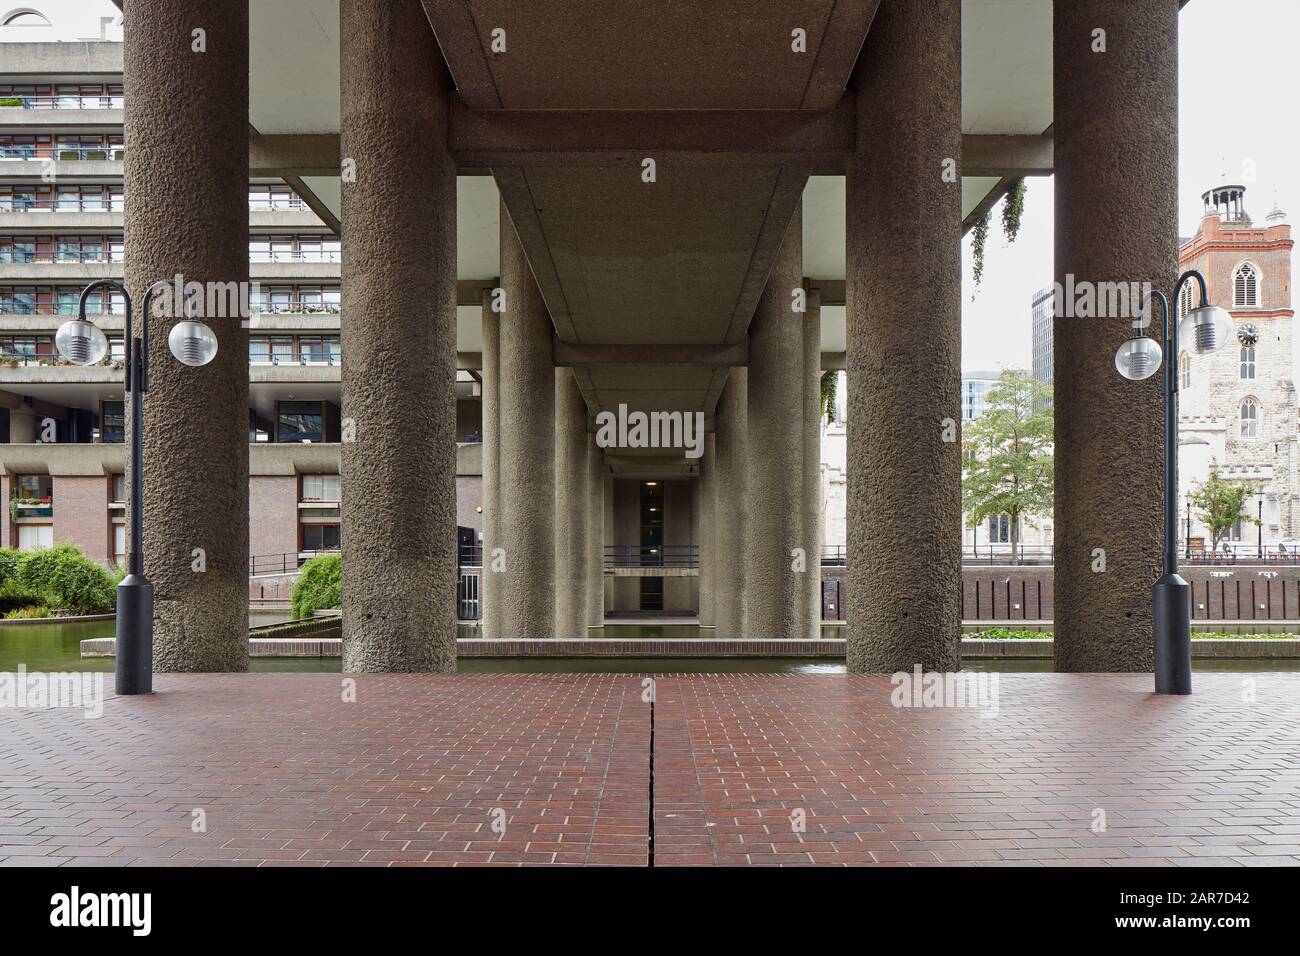 View through load-bearing colonnade with water features. Barbican Estate, London, United Kingdom. Architect: Chamberlin, Powell and Bon, 1969. Stock Photo